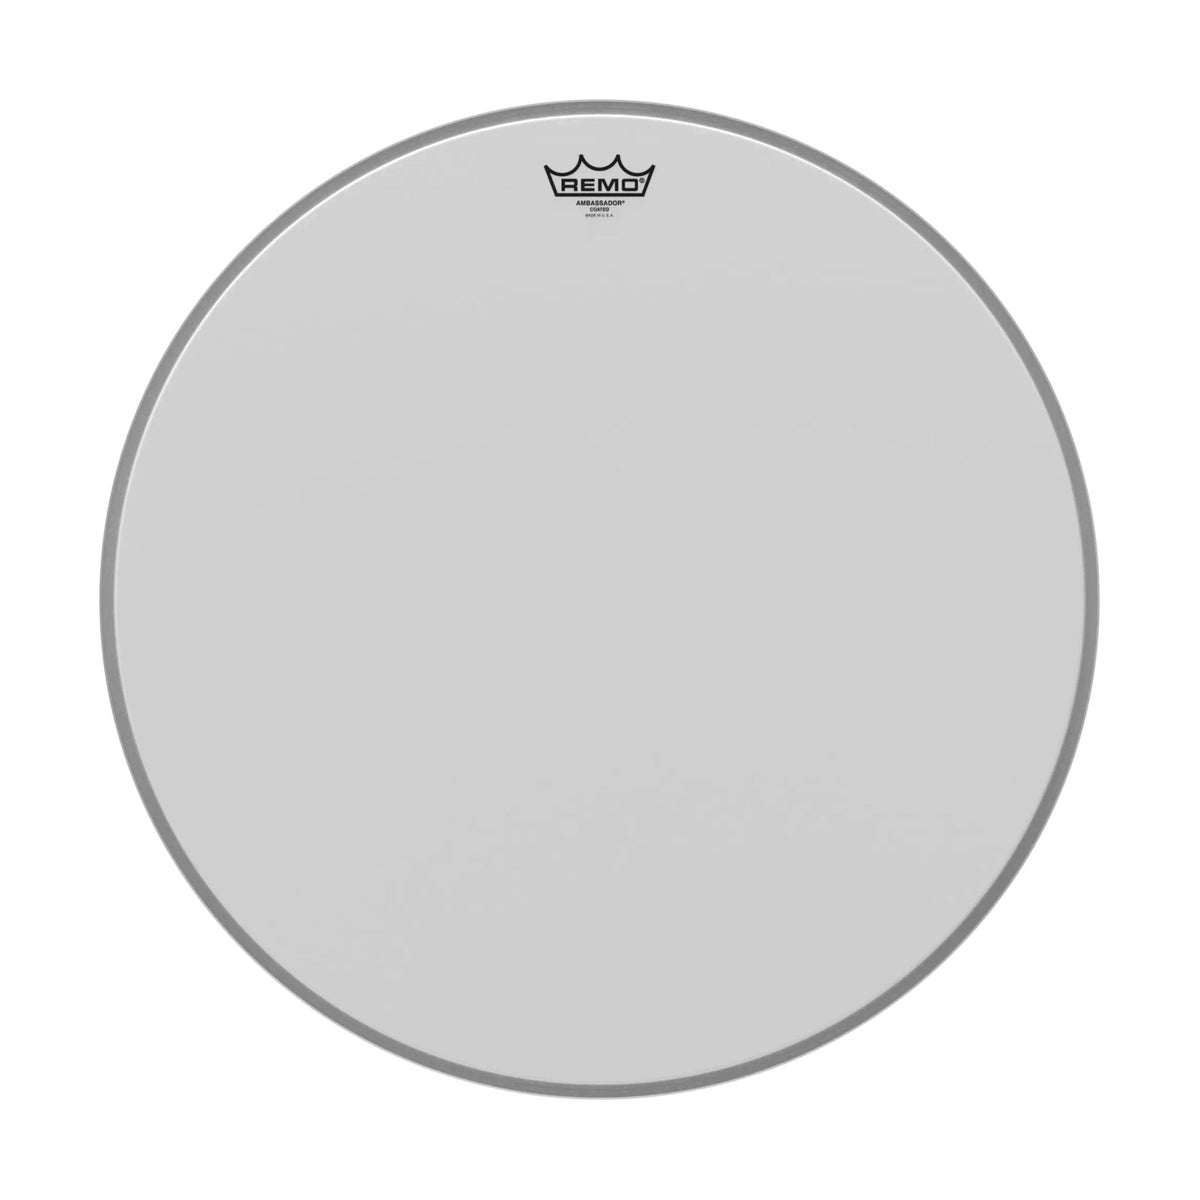 Remo Ambassador 22 Inch Coated Drumhead BR-1122-00